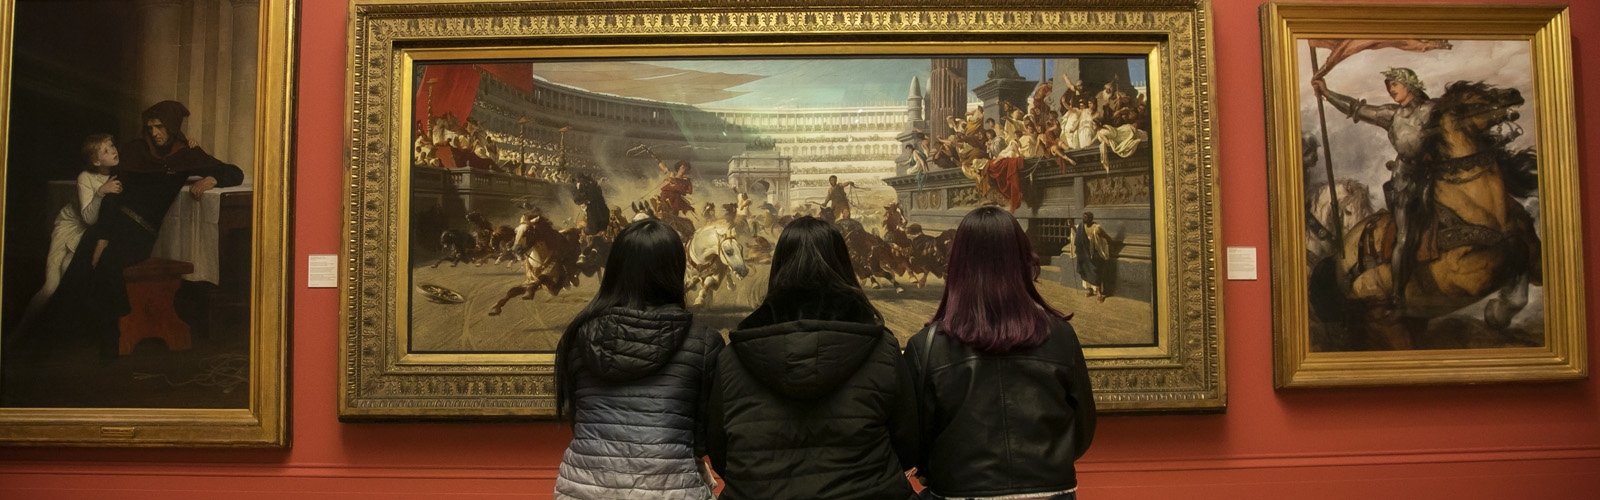 Photo of friends from the back looking at the painting inside the art gallery